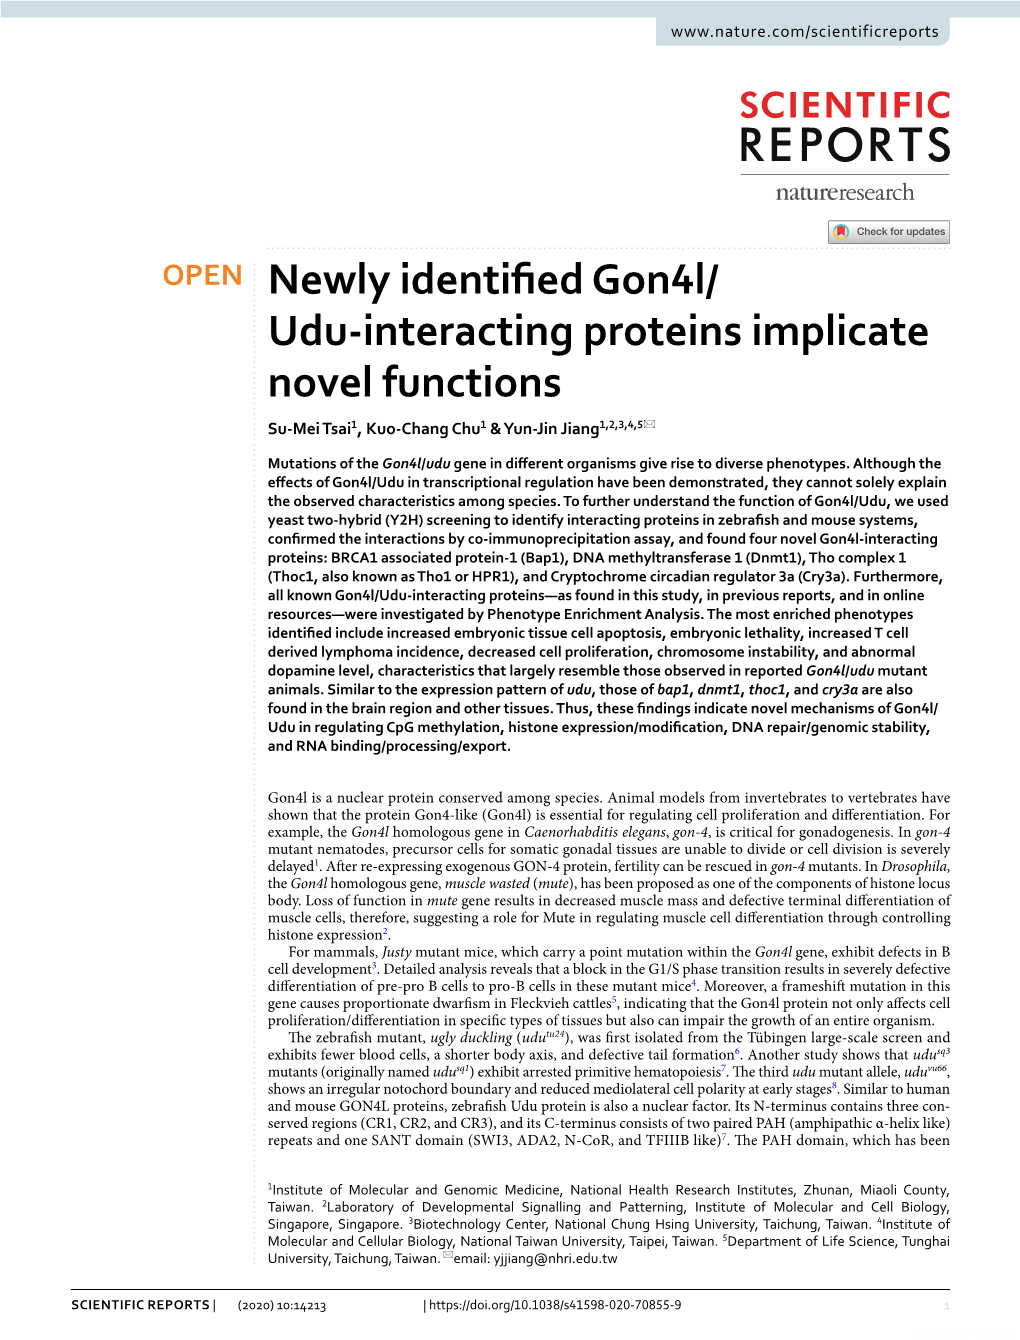 Newly Identified Gon4l/Udu-Interacting Proteins